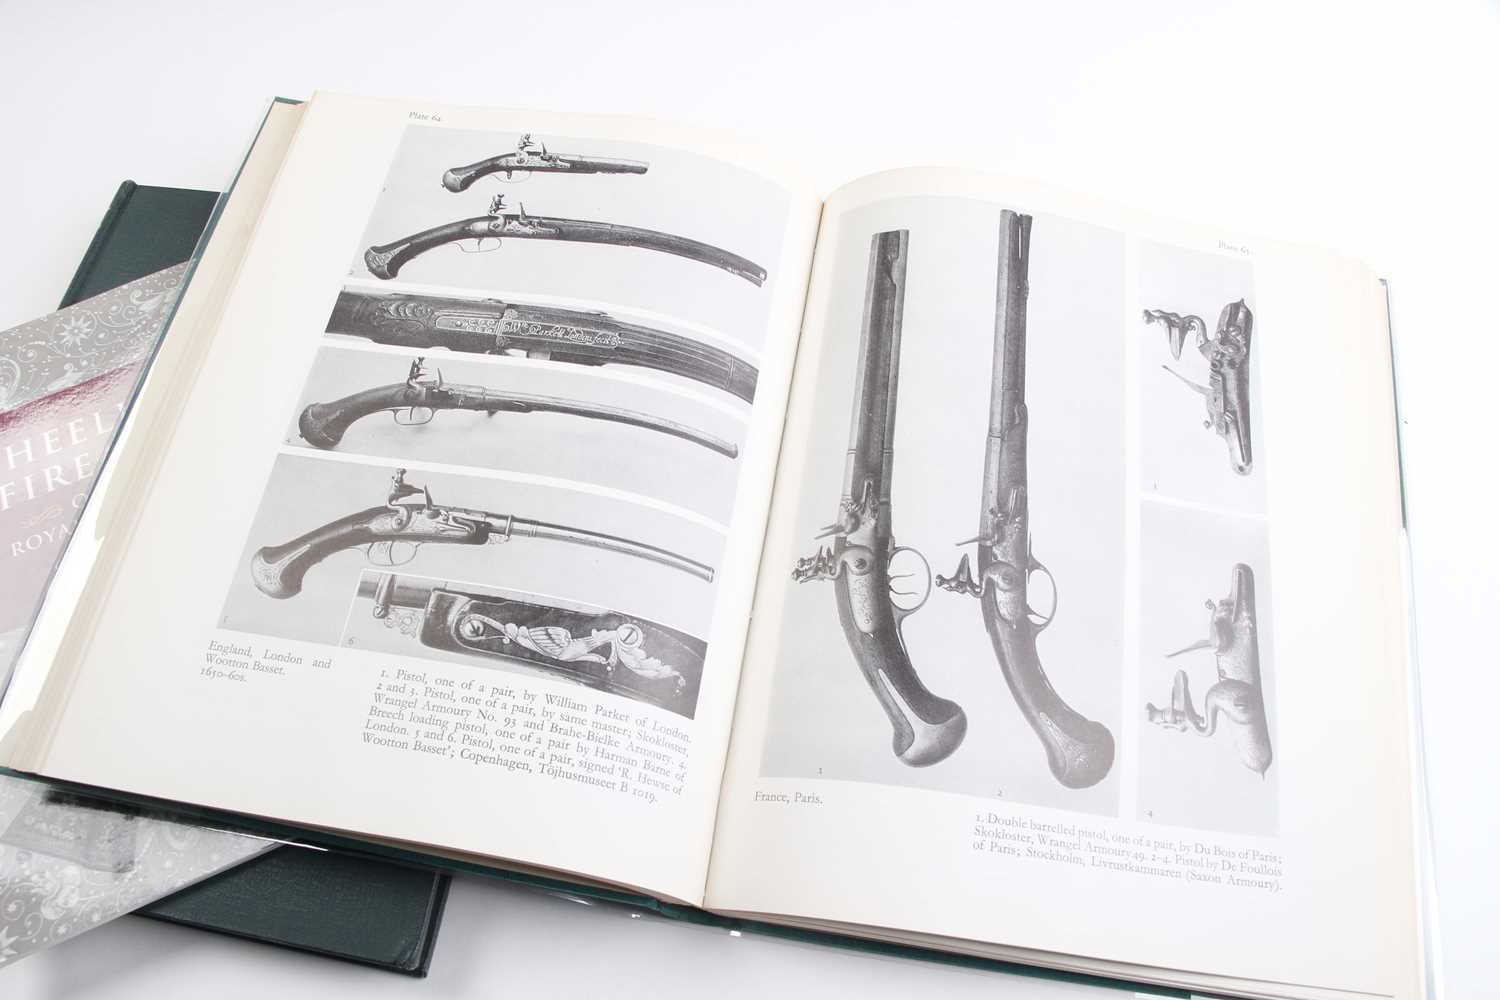 5 Vols: Armourers Marks by Dudley S Hawtrey Gyngell; Wheellock Firearms of the Royal Armouries by - Image 6 of 8